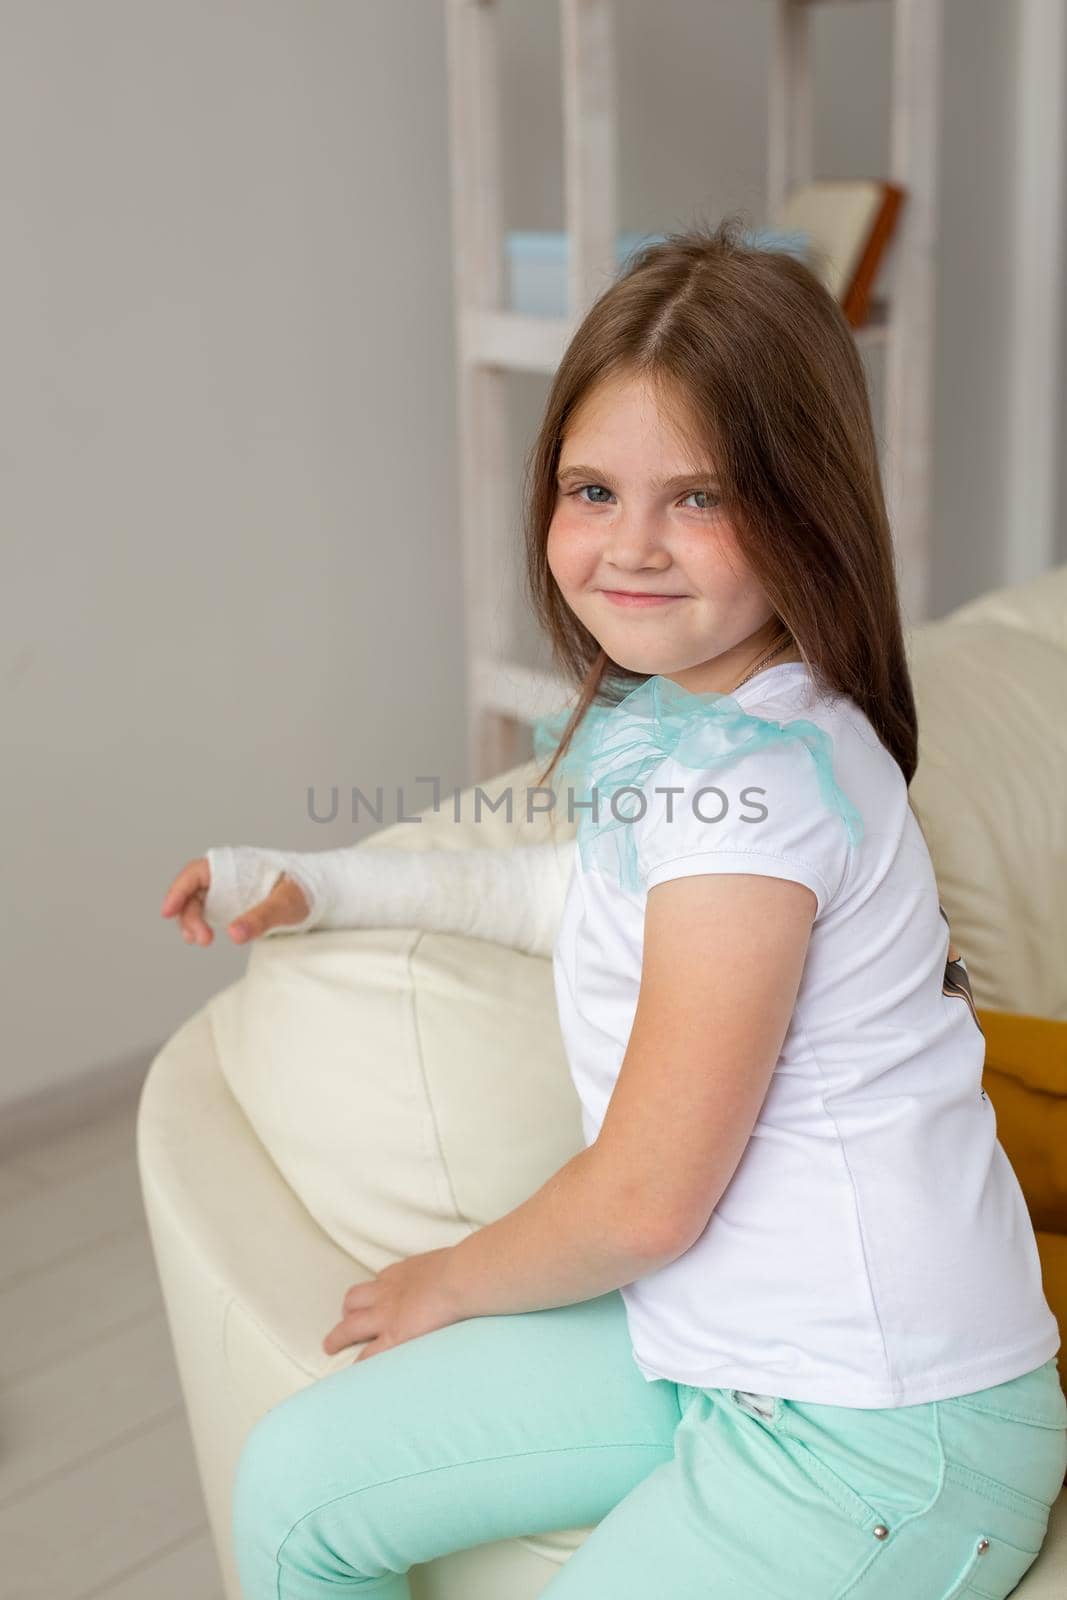 Child with a cast on a broken wrist or arm smiling and having fun on a couch. Positive attitude, recovery and kid.